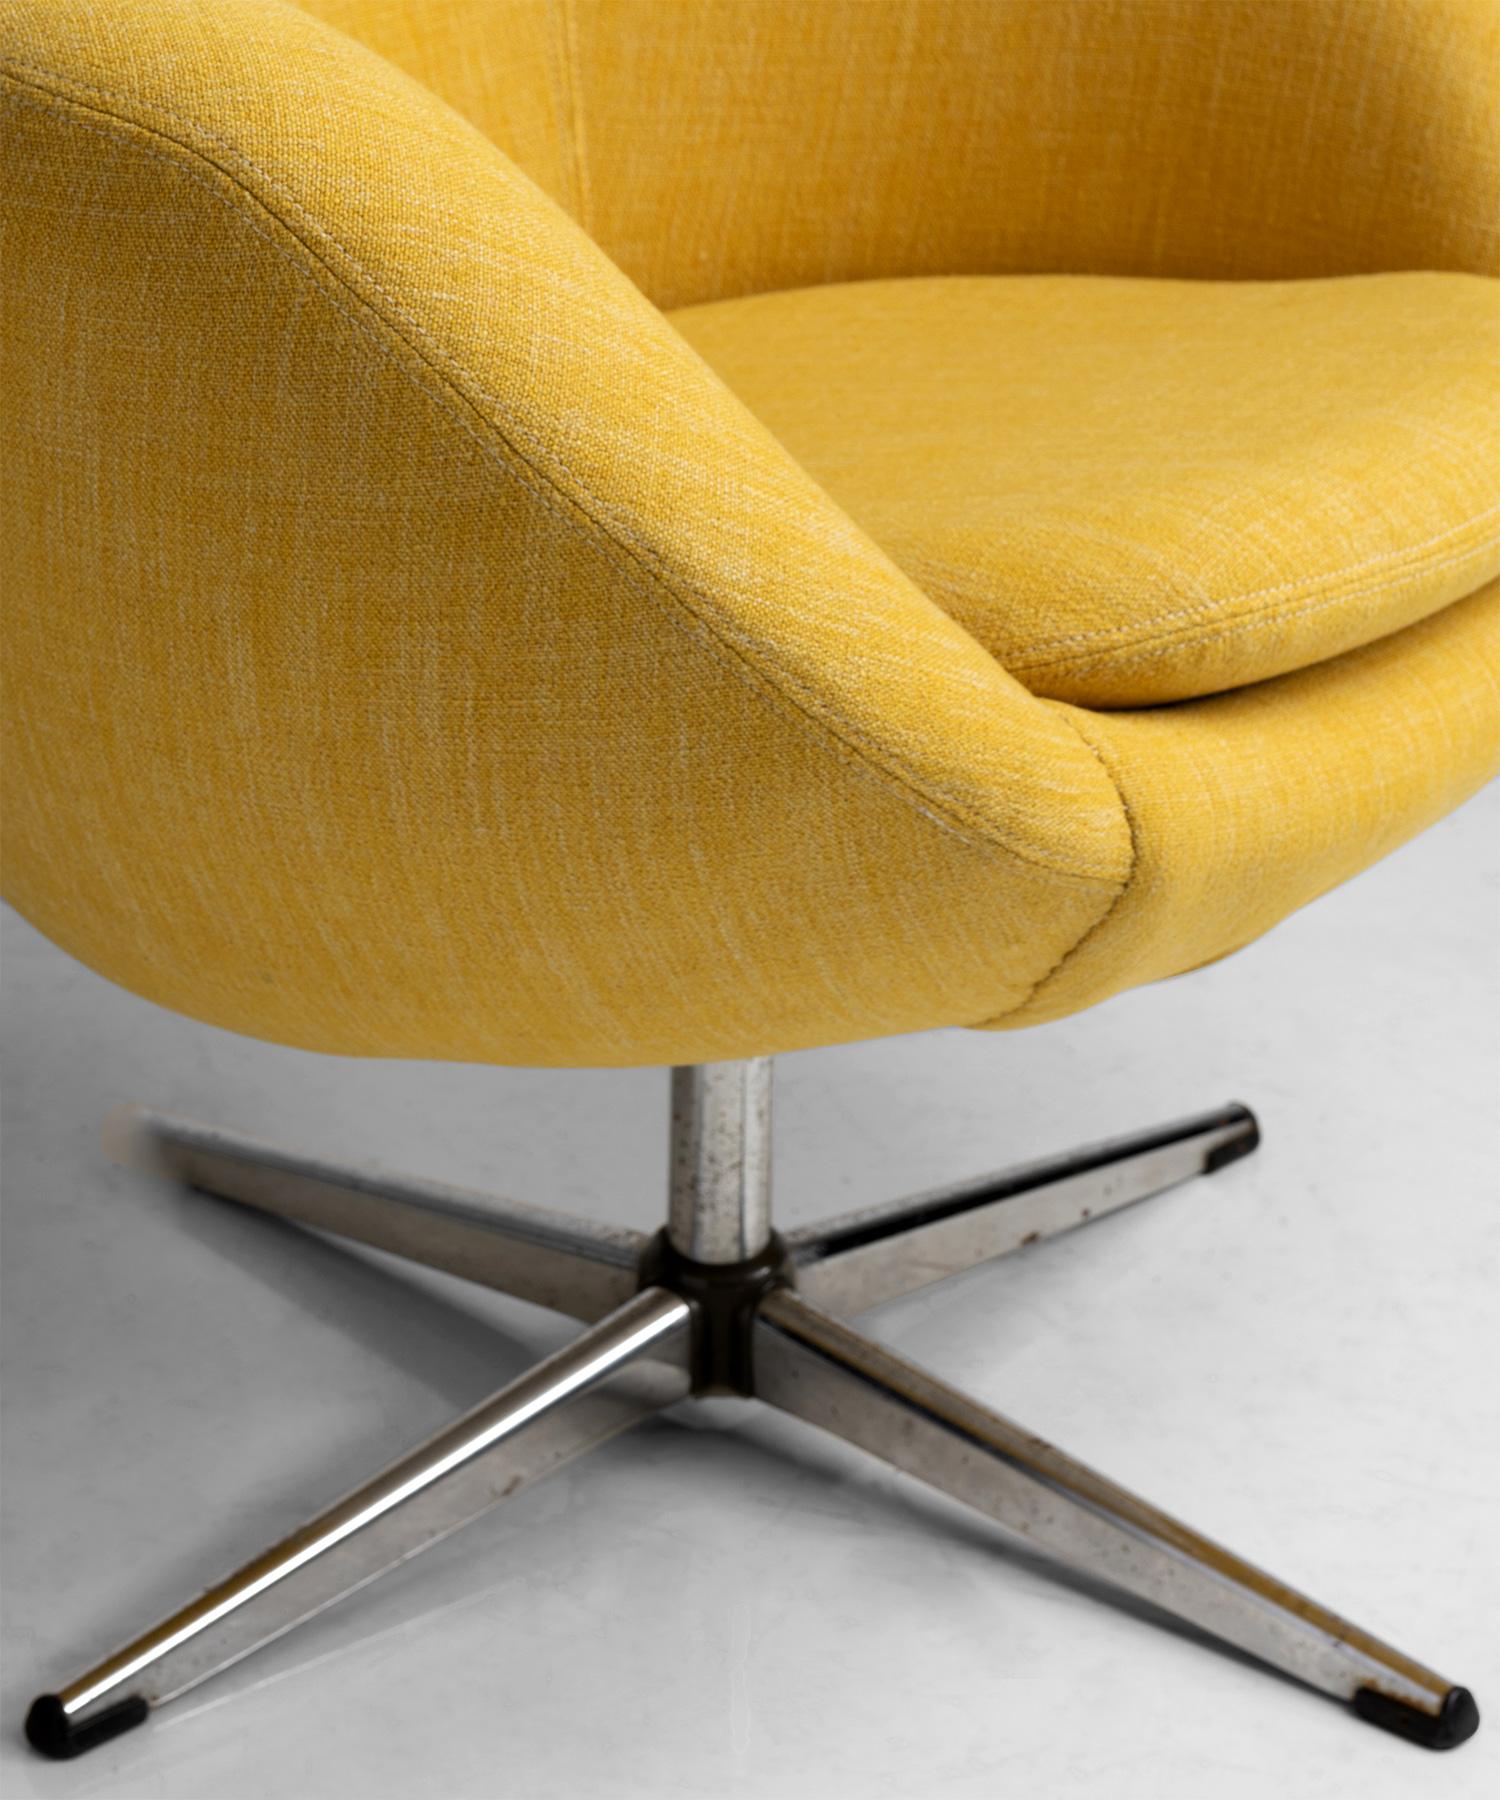 20th Century Pair of Overman Swivel Chairs in Wool Blend by Maharam, America circa 1960